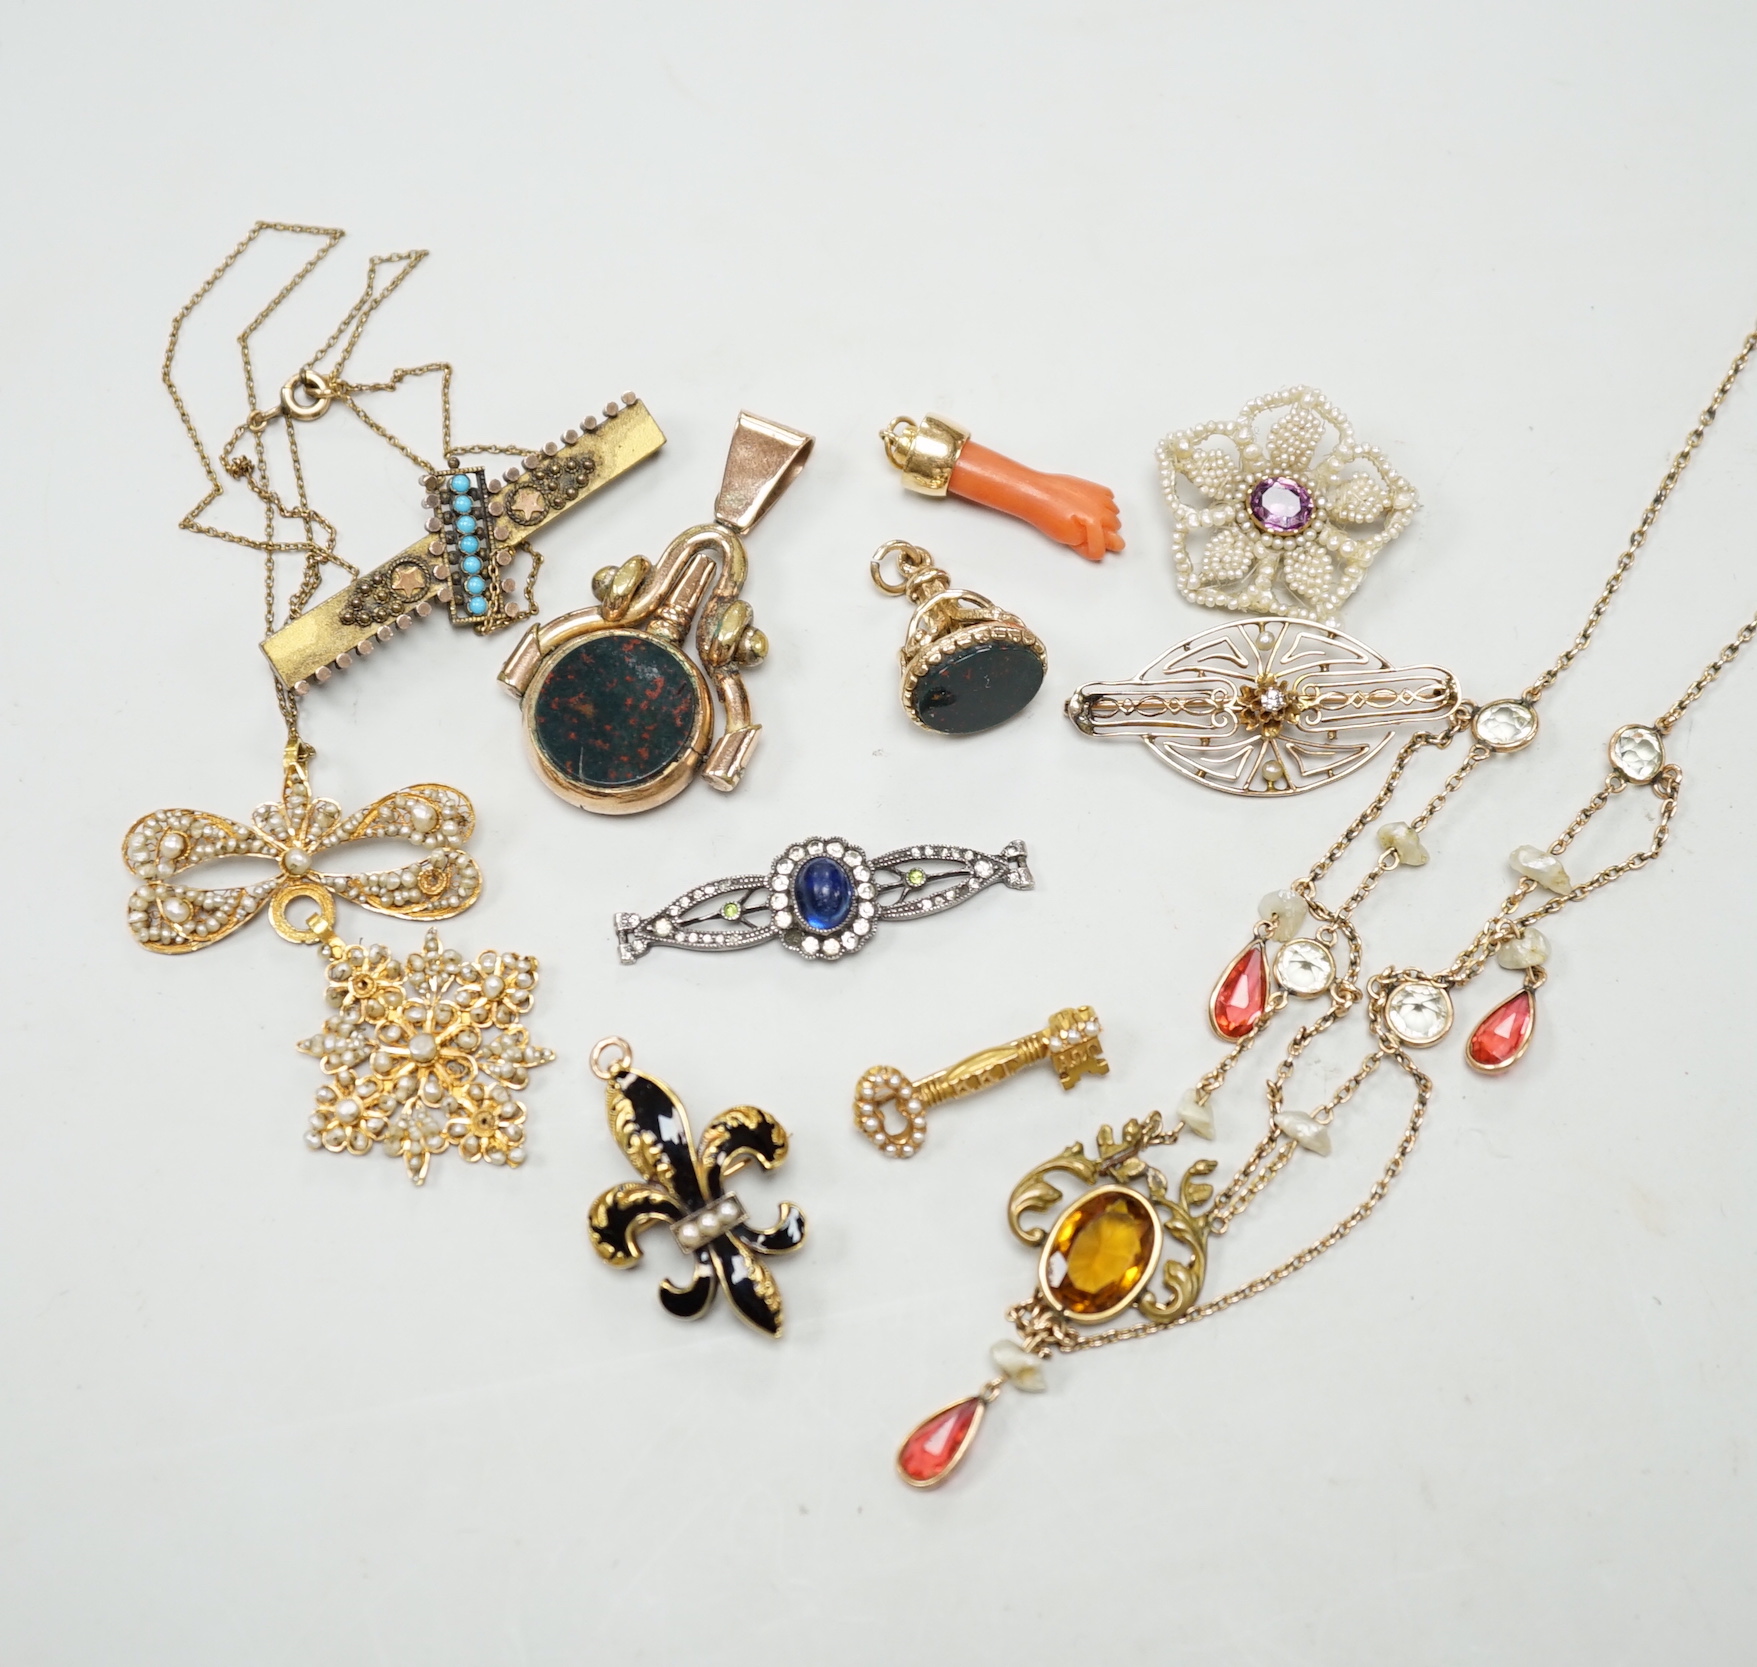 A small group of antique and later jewellery, including 9ct gold and bloodstone fob seal, a 1930's yellow metal and seed pearl set key brooch, 14k and black enamel brooch, spinning fob pendant, coral hand charm, 10k and 